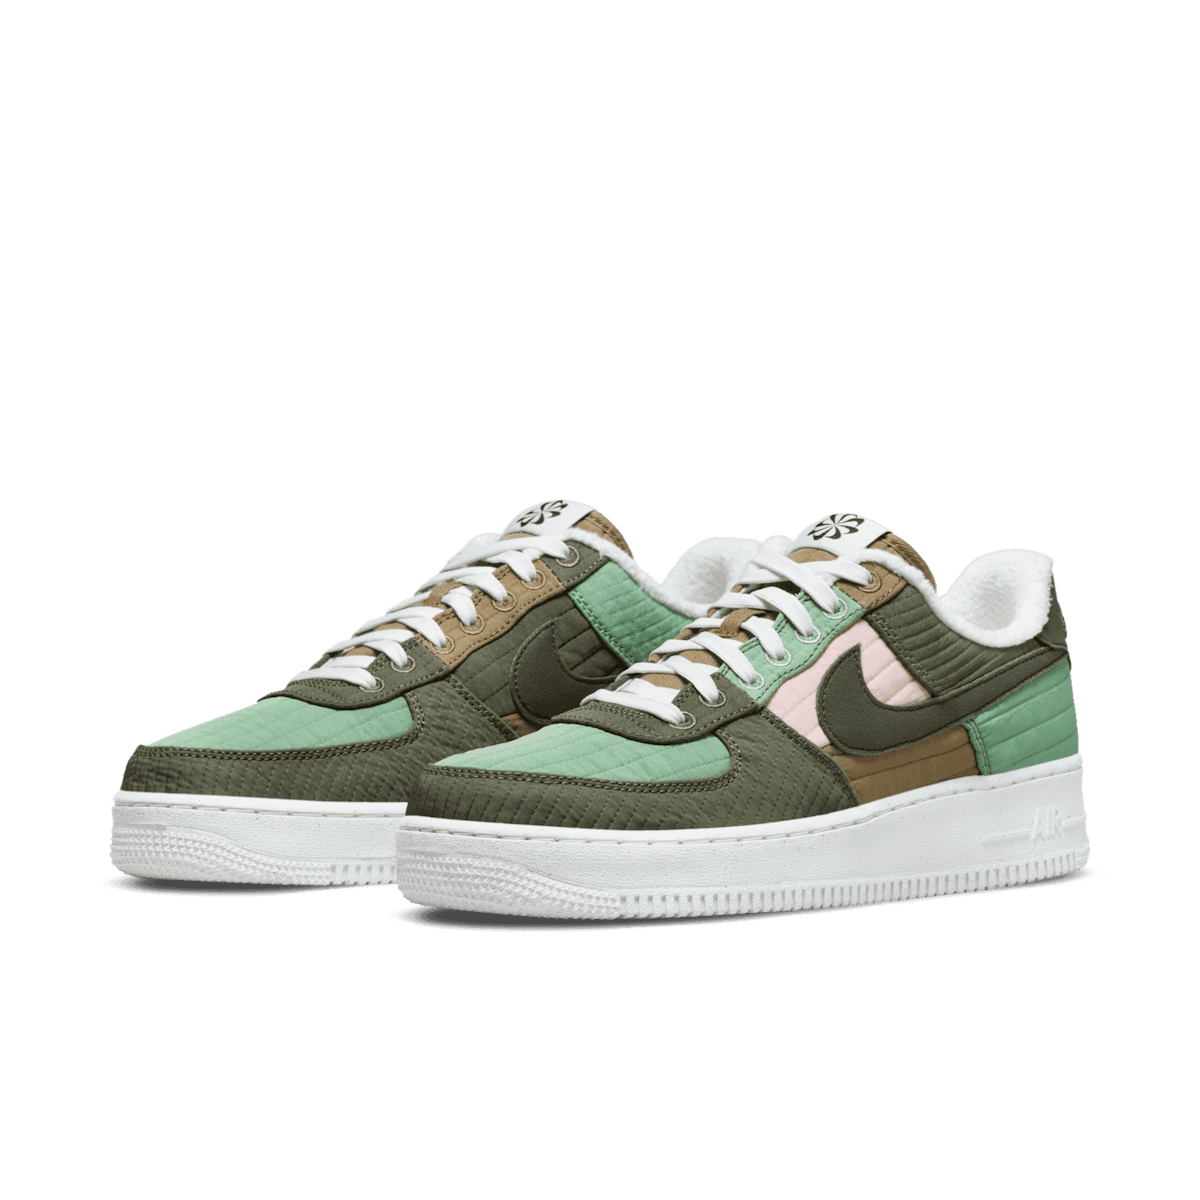 Nike Air Force 1 '07 LX Low Toasty Oil Green Angle 2